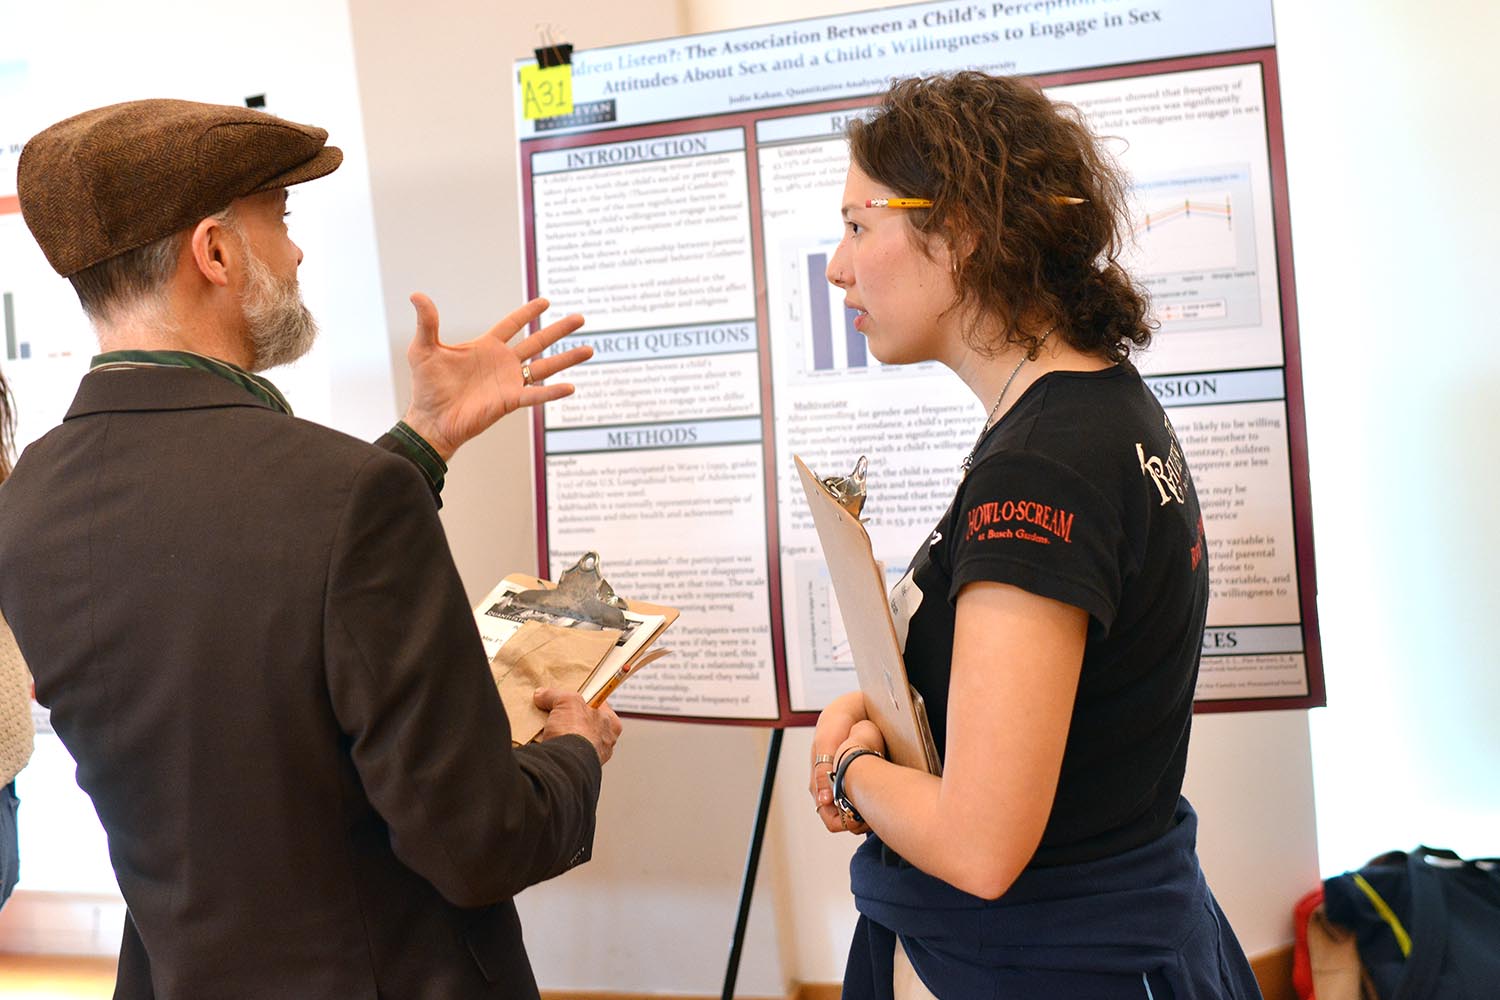 Jodie Kahan '21 presented her study titled, "Do Children Listen?: The Association Between a Child's Perception of their Mothers' Attitudes About Sex and a Child's Willingness to Engage in Sex."